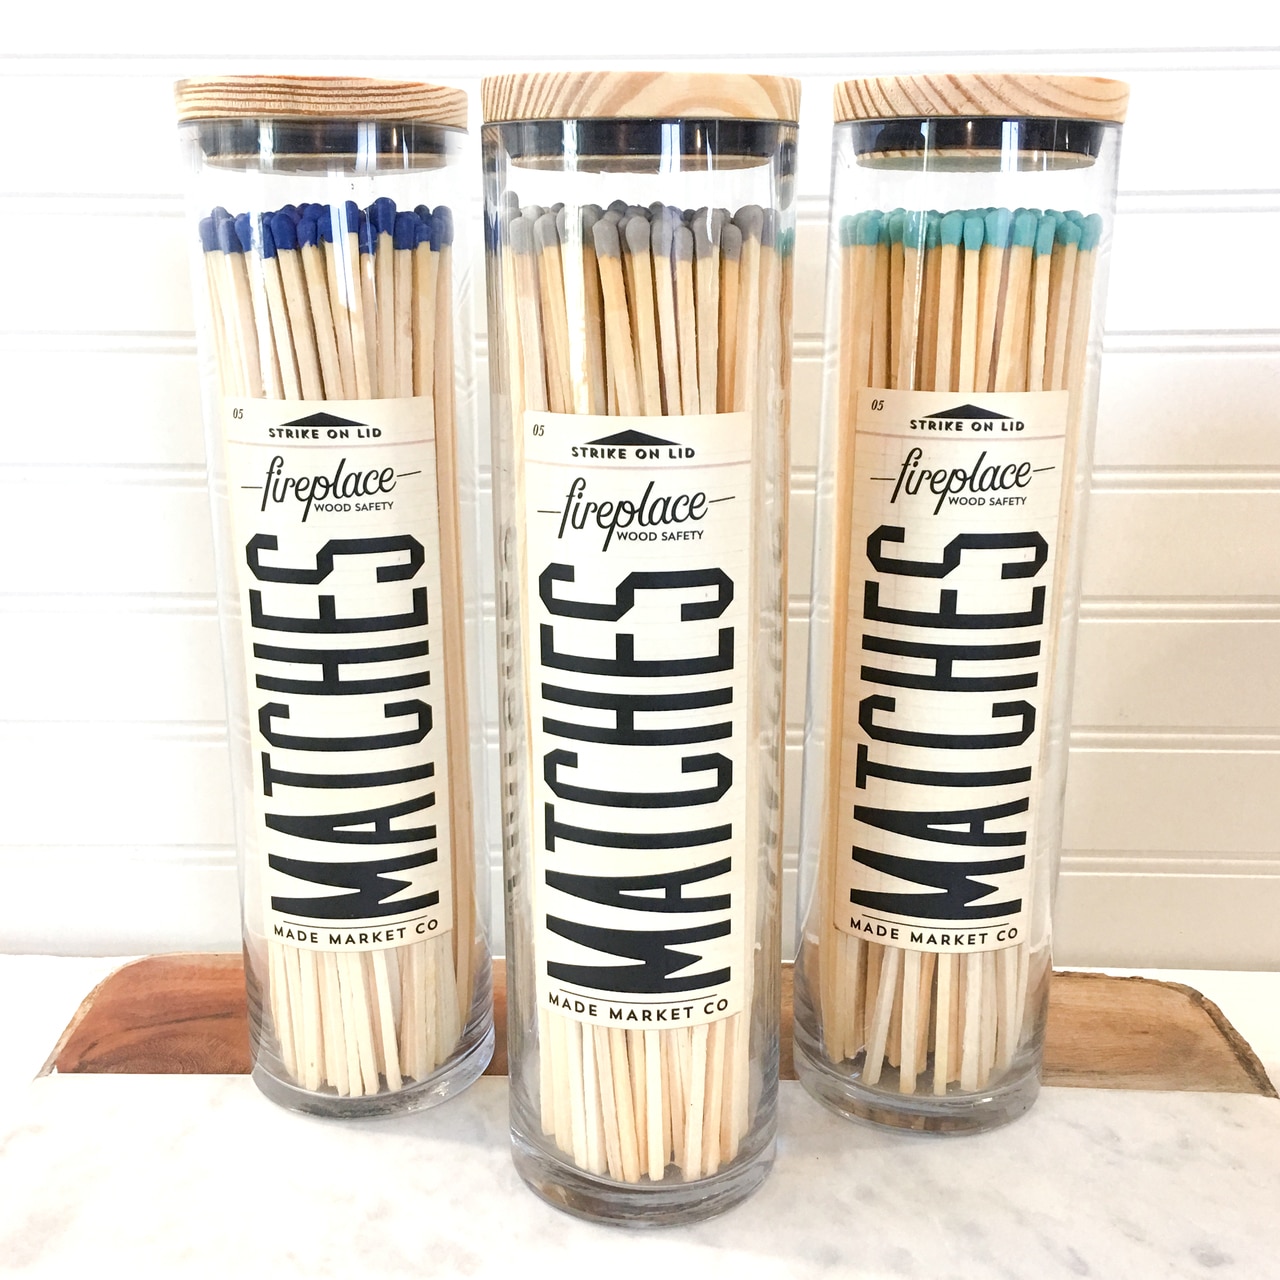 Apothecary Vintage Fireplace Blue Matches - Be Made